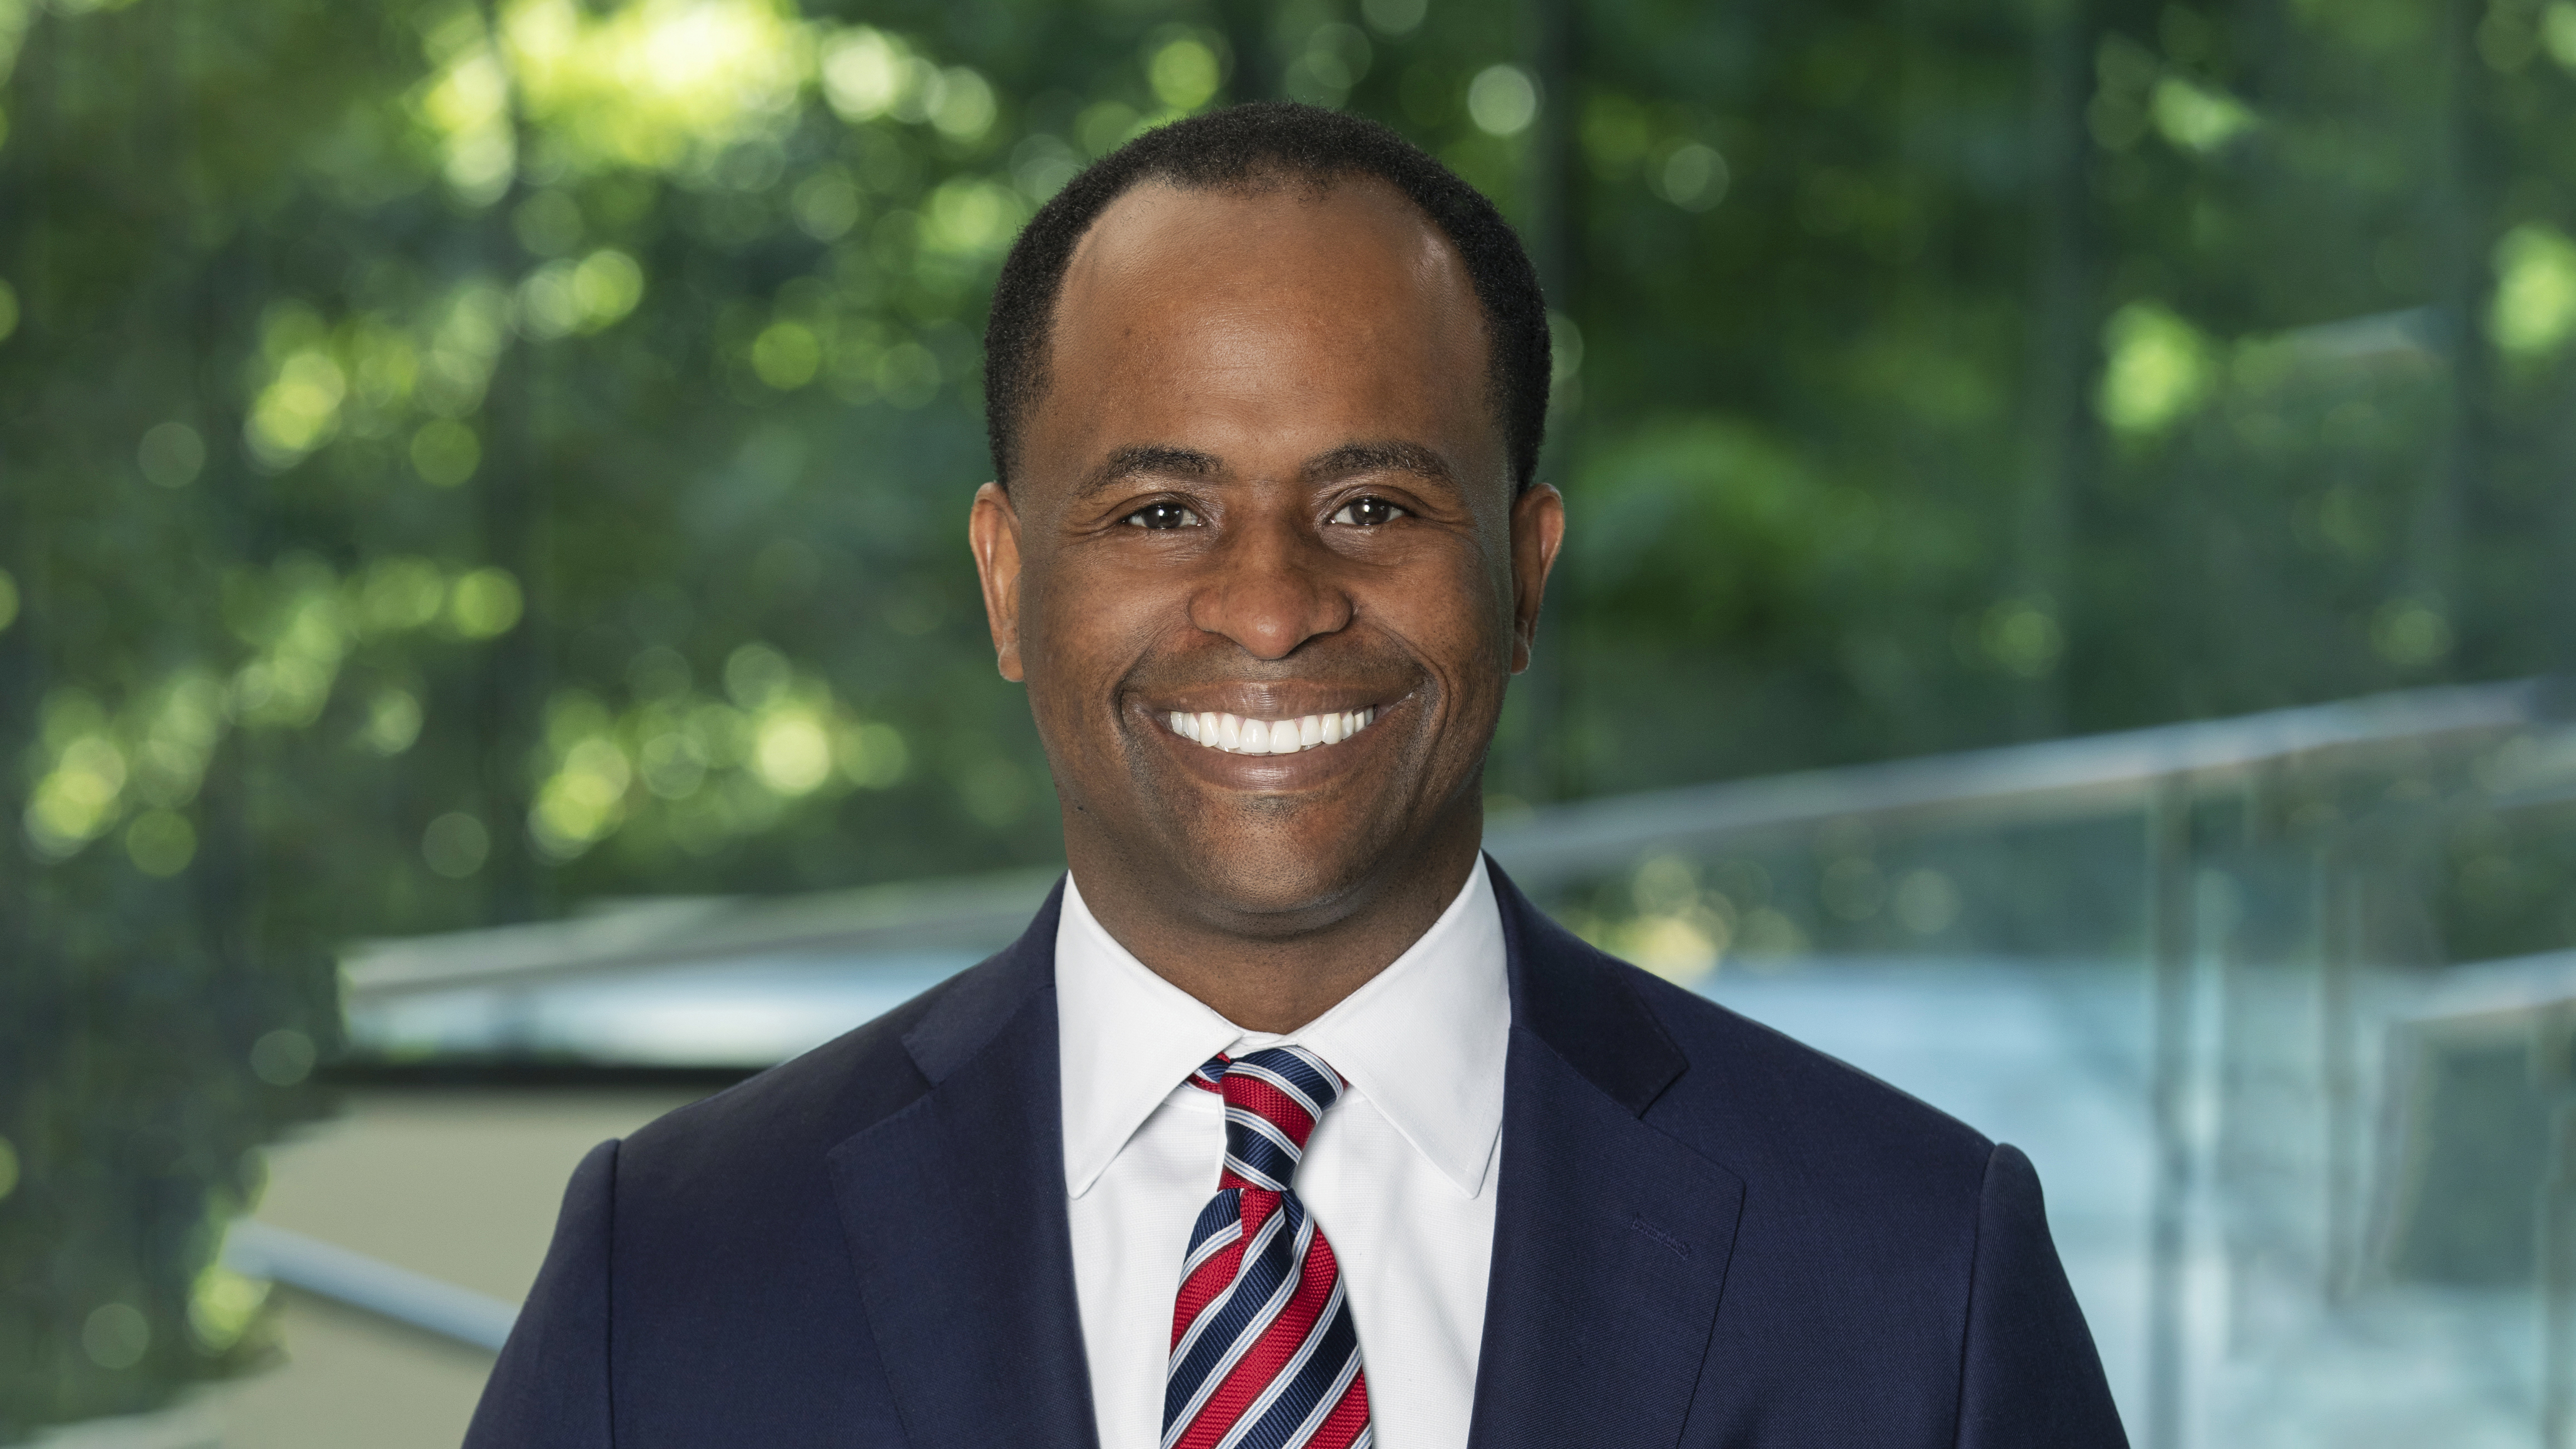 Morgan Stanley's Jesse Walton Sees The 'Bigger Picture' To Closing The Racial Wealth Gap